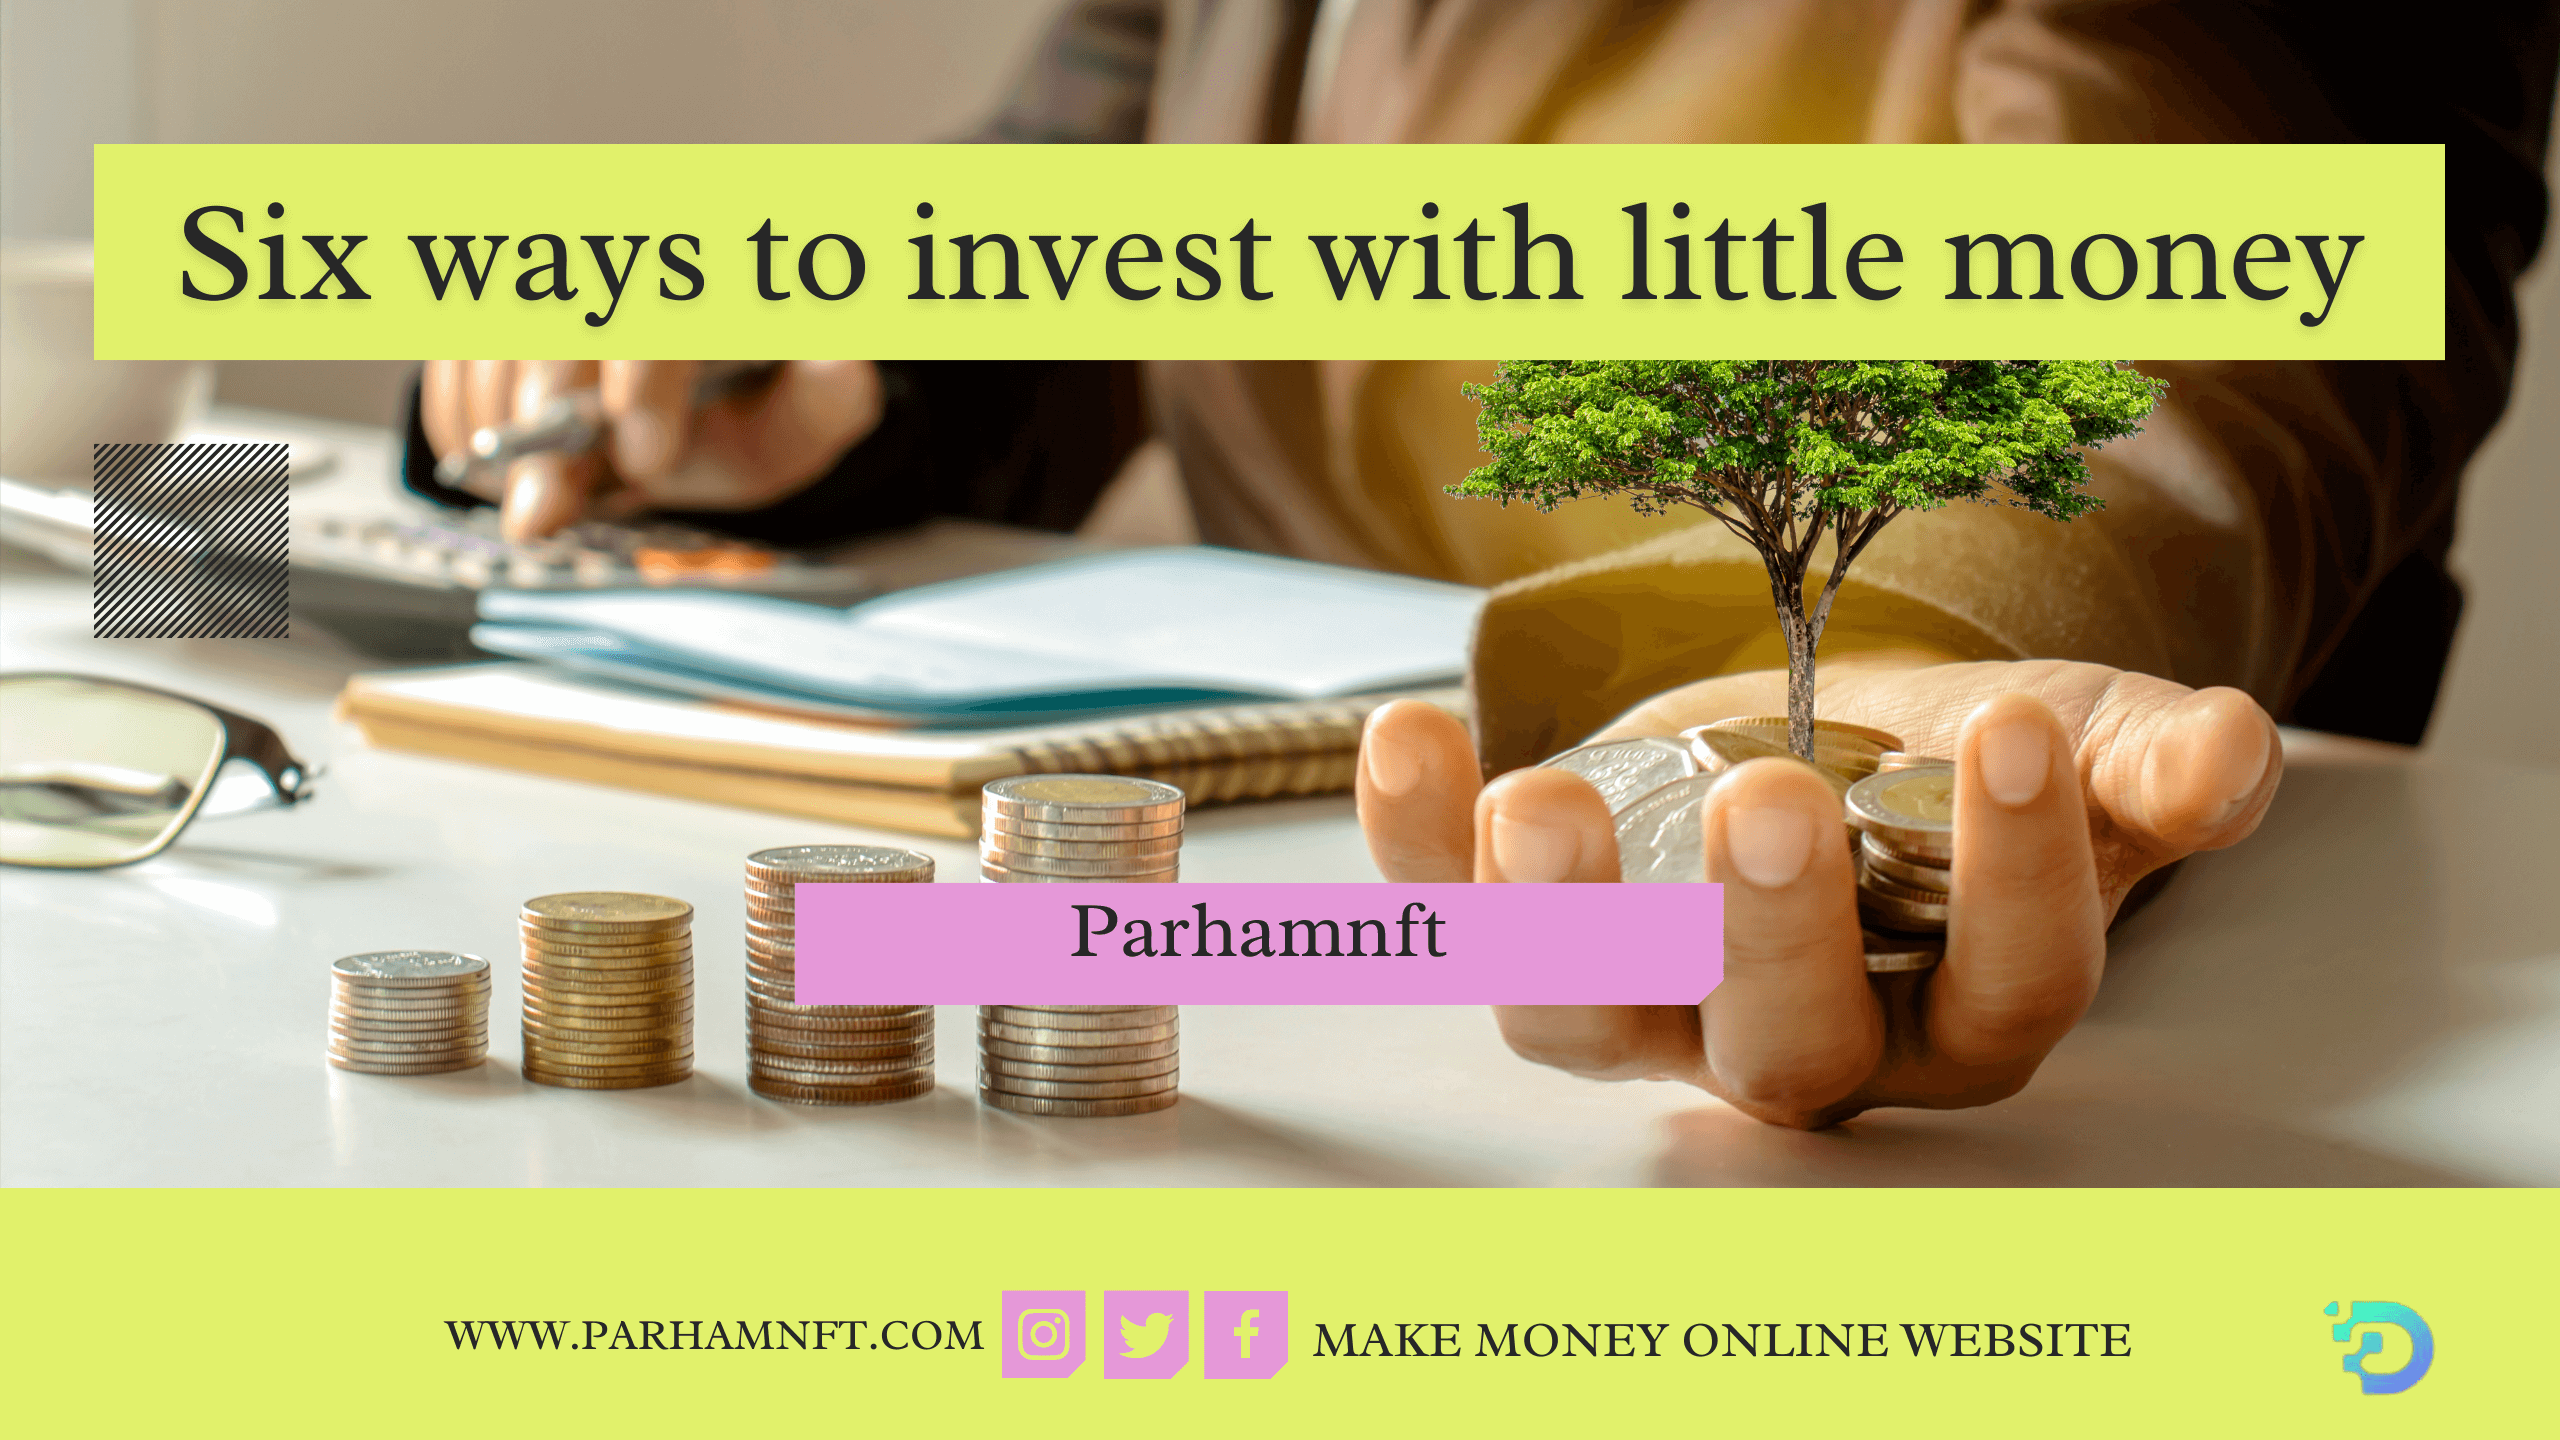 Six ways to invest with little money